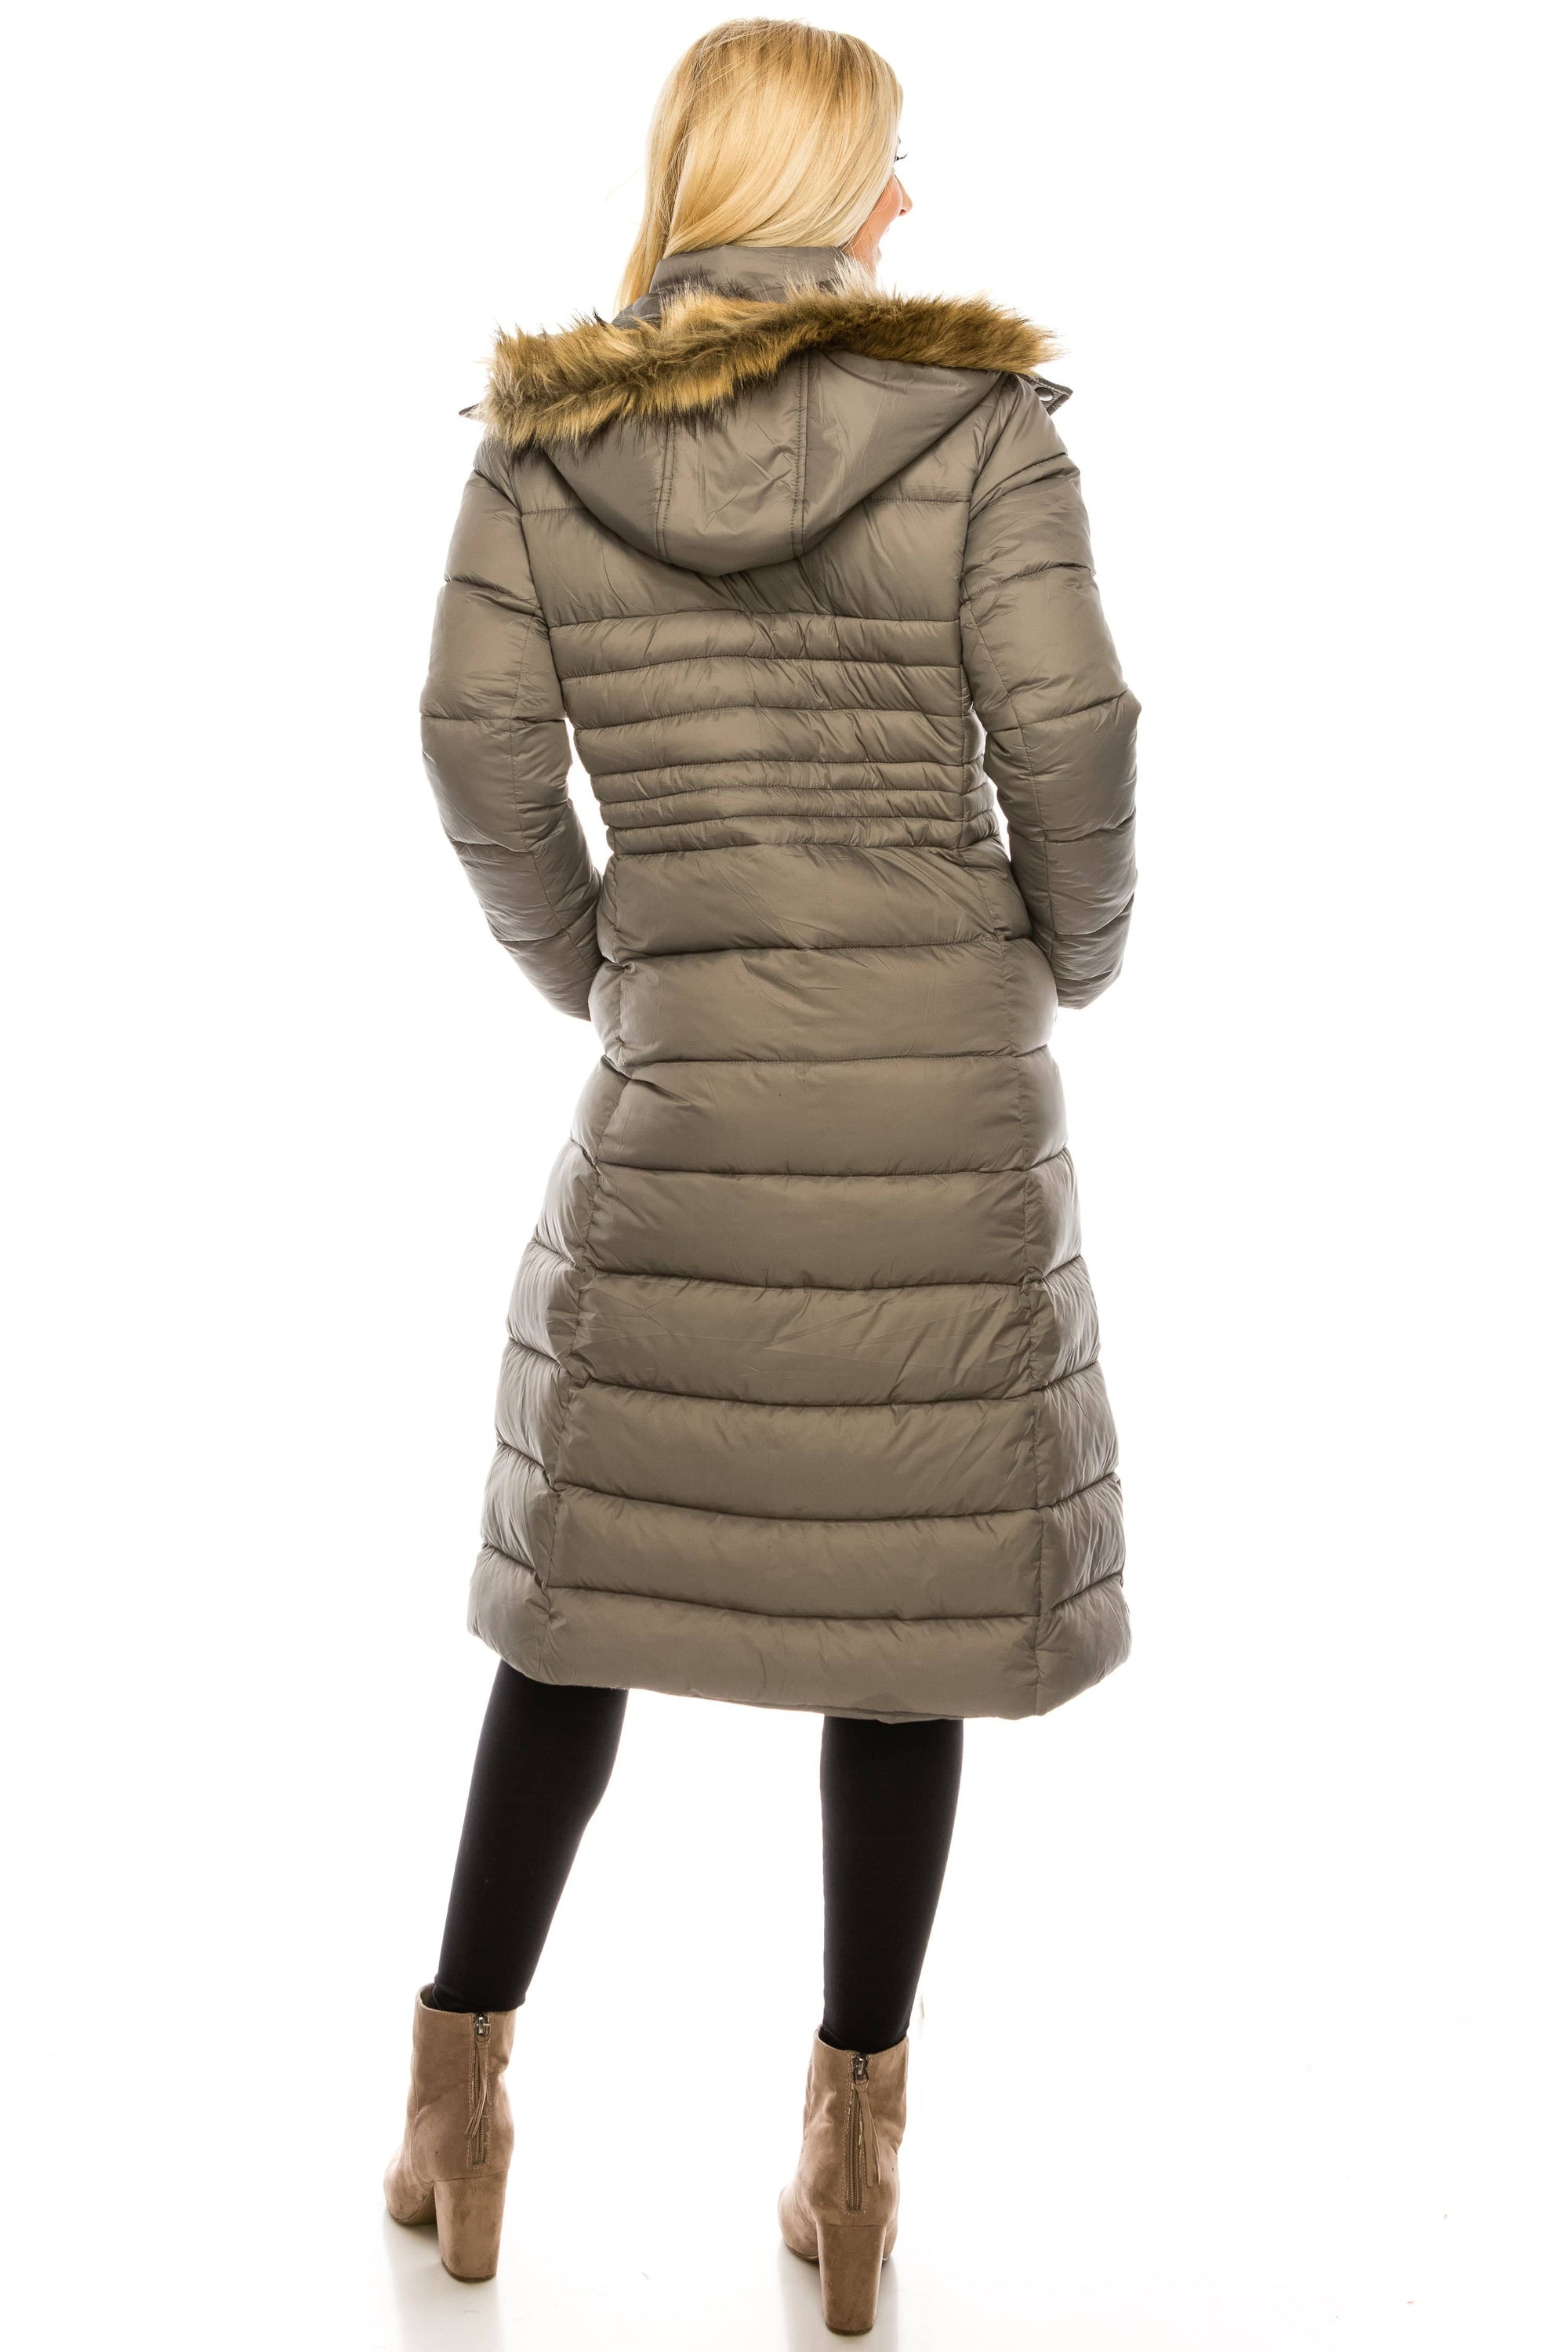 Haute Edition Women's Maxi Length Quilted Puffer with Fur Lined Hood